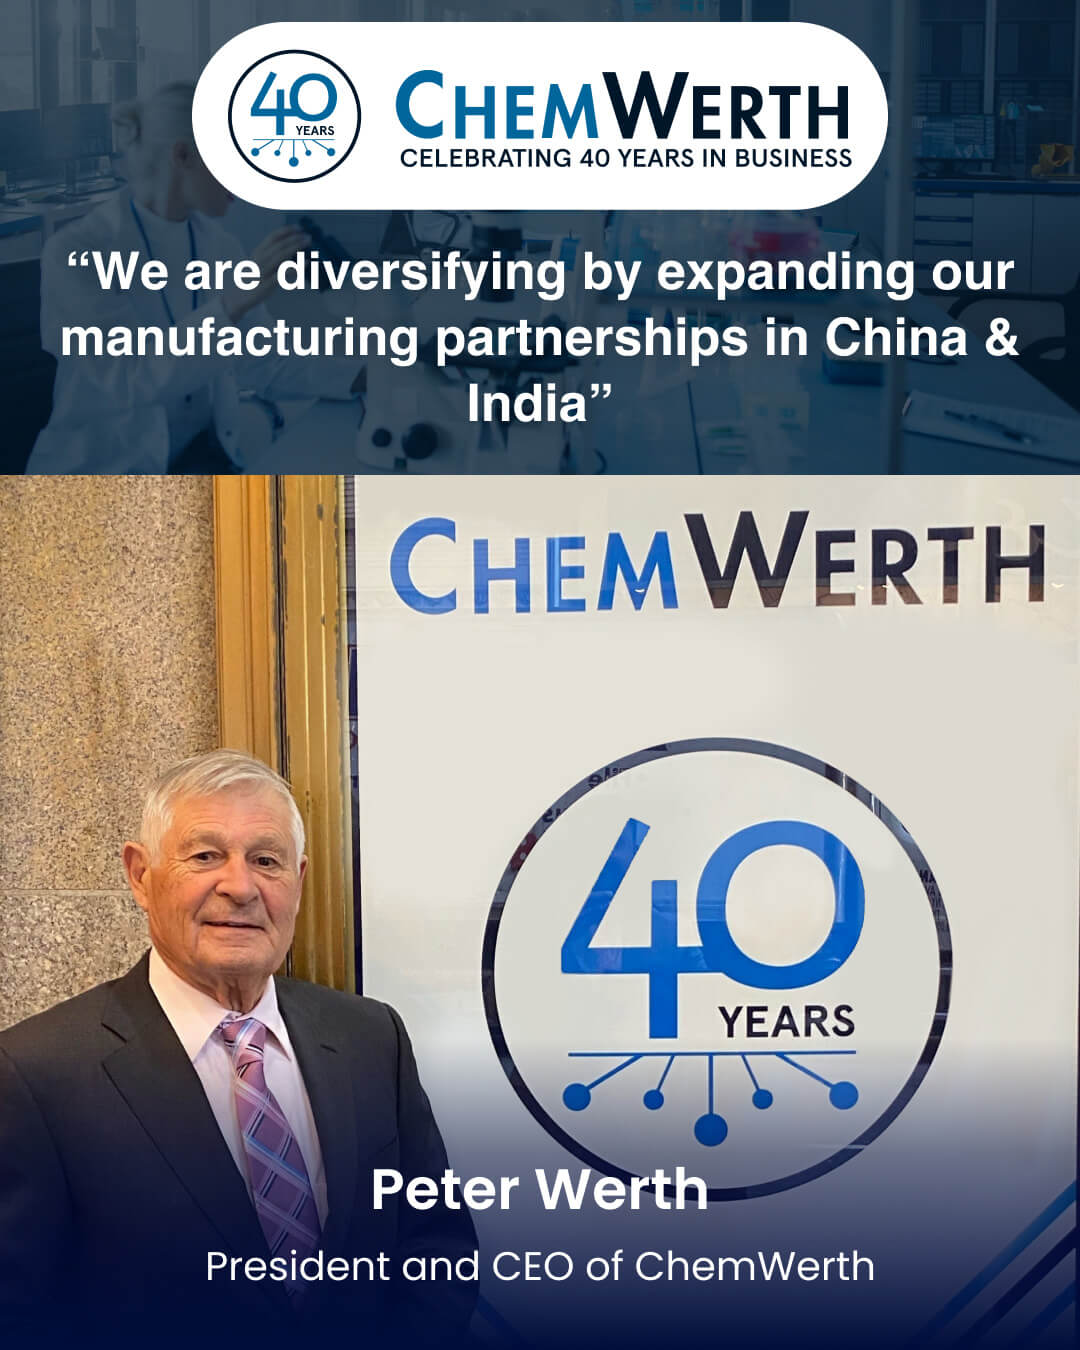 “We are diversifying by expanding our manufacturing partnerships in China & India”